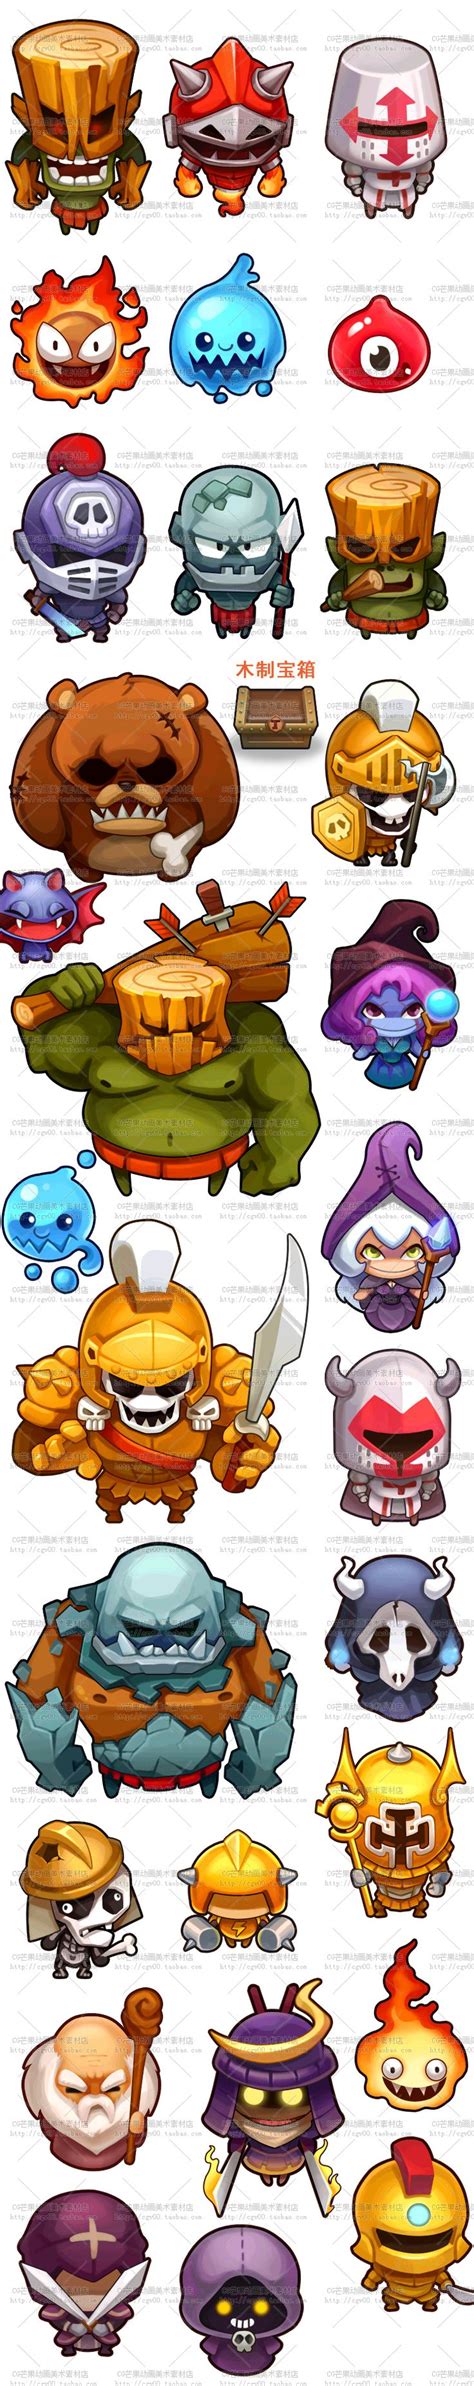 characters game character design concept art characters character art